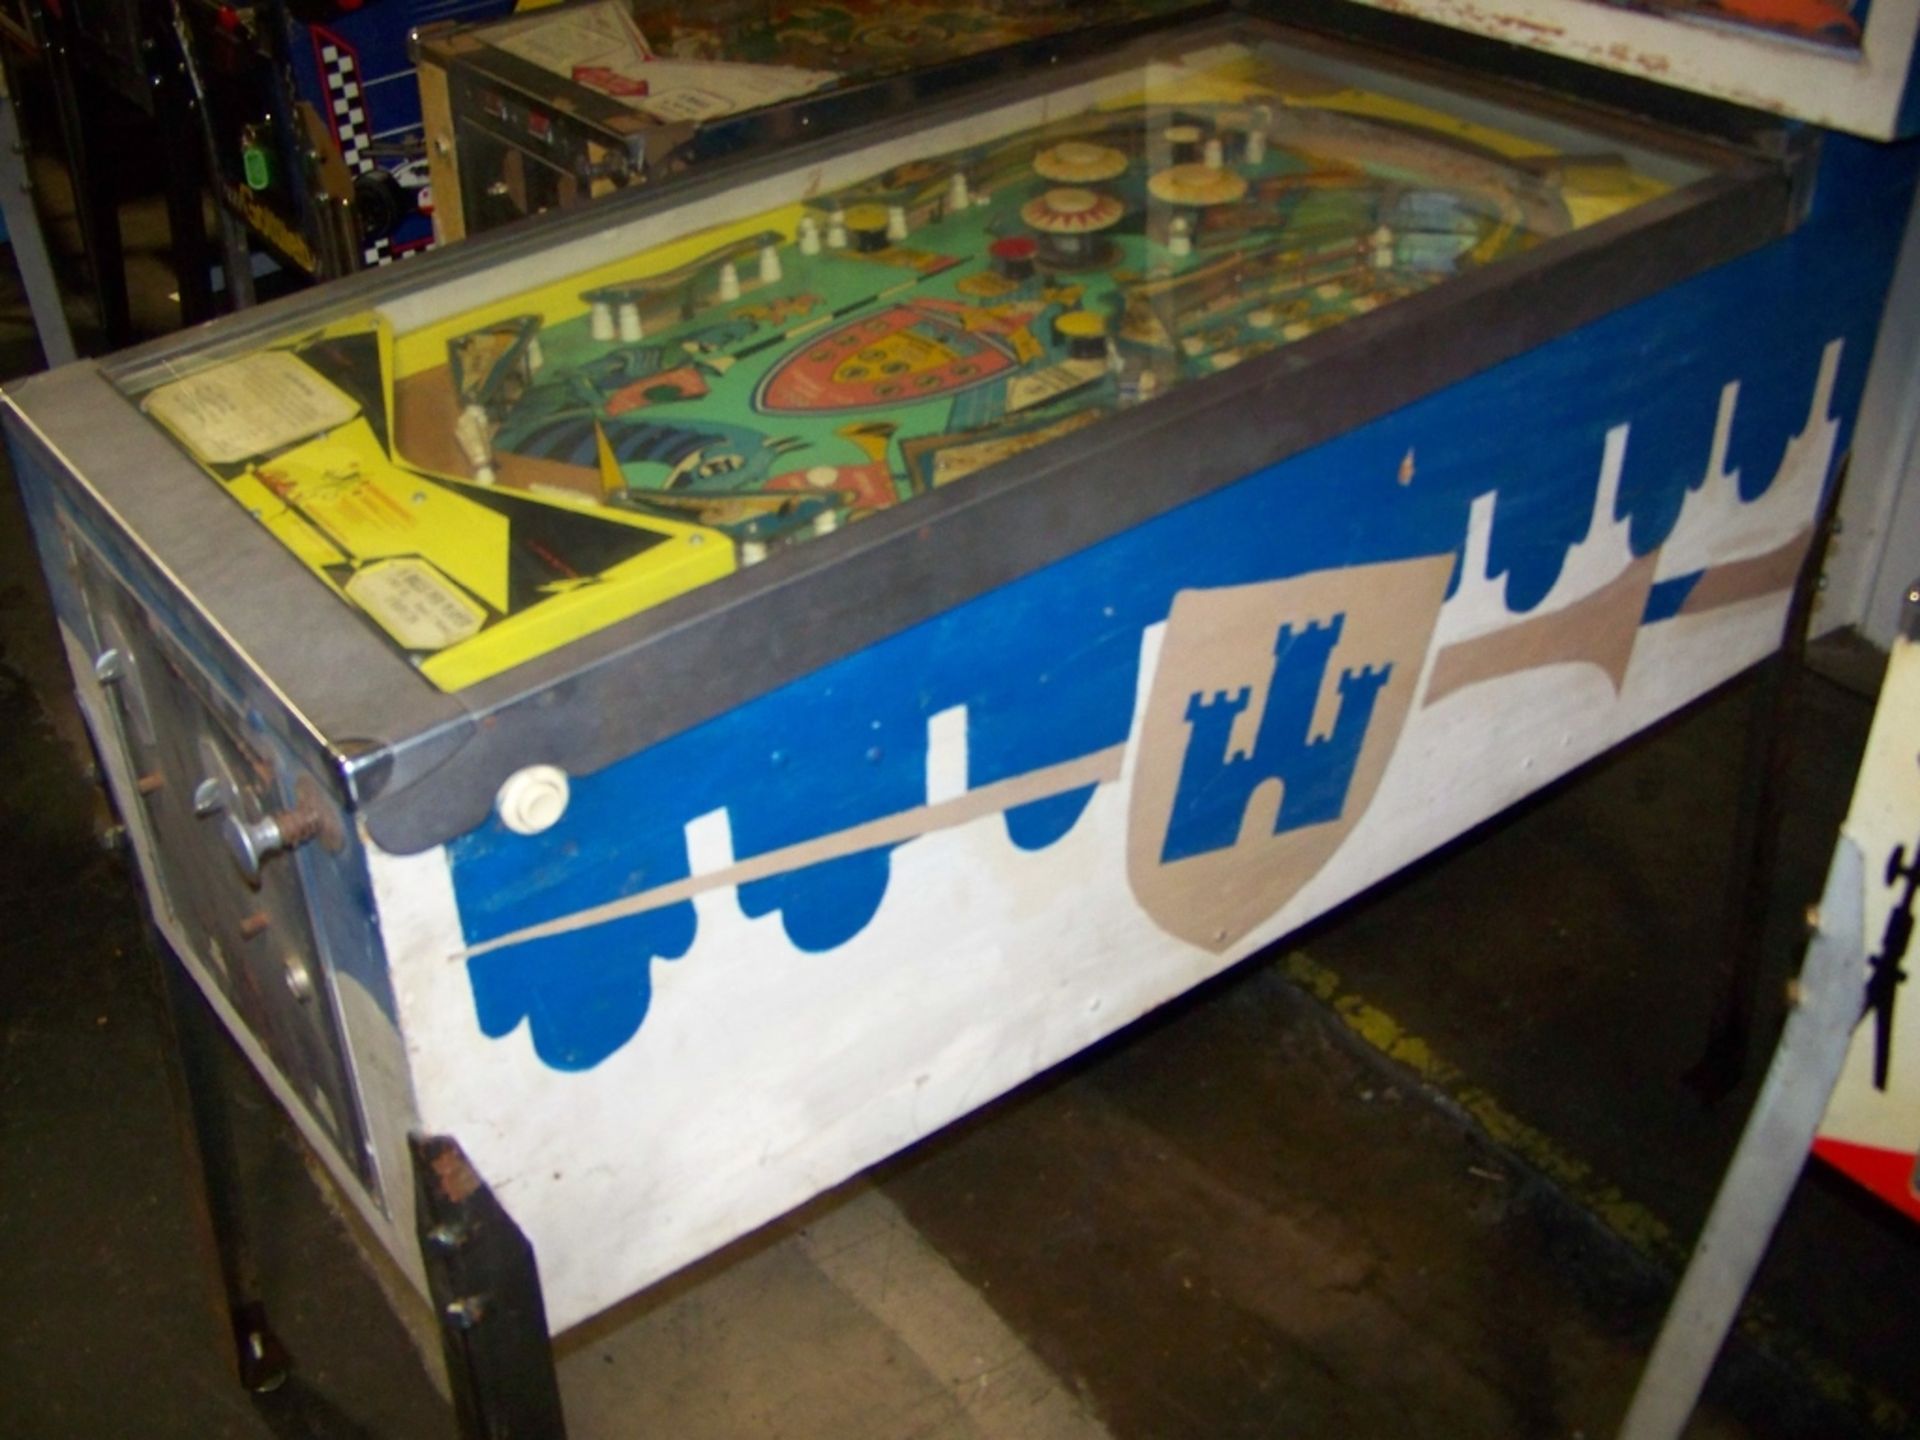 JOUST CLASSIC PINBALL MACHINE BALLY 1969 Item is in used condition. Evidence of wear and - Image 6 of 6